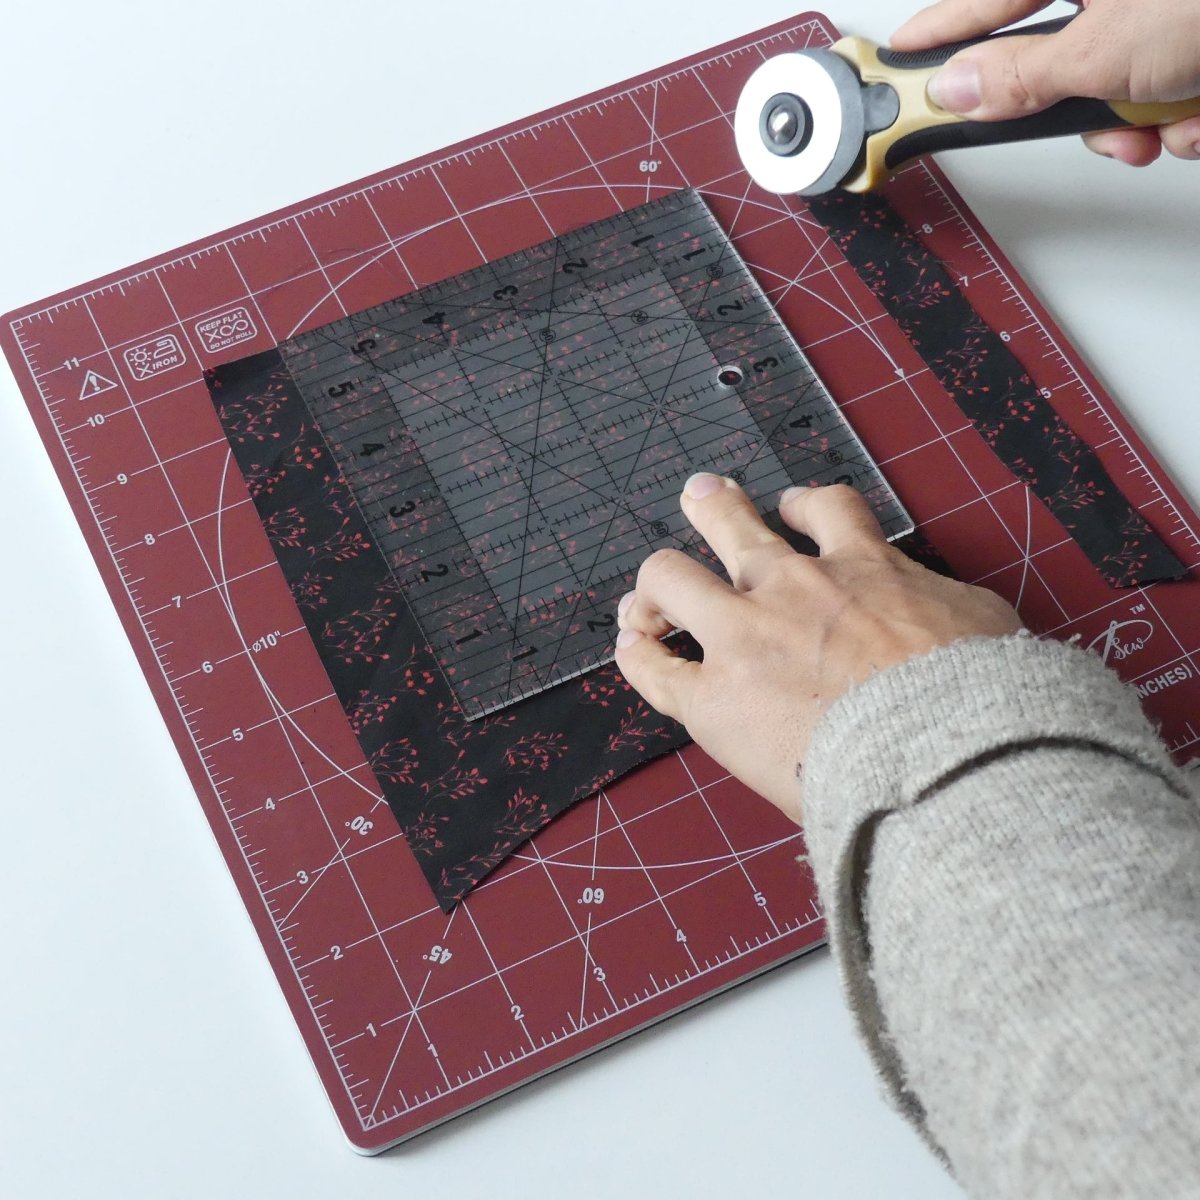 Cutting a piece of fabric on the Madam Sew 12-inch rotating cutting mat